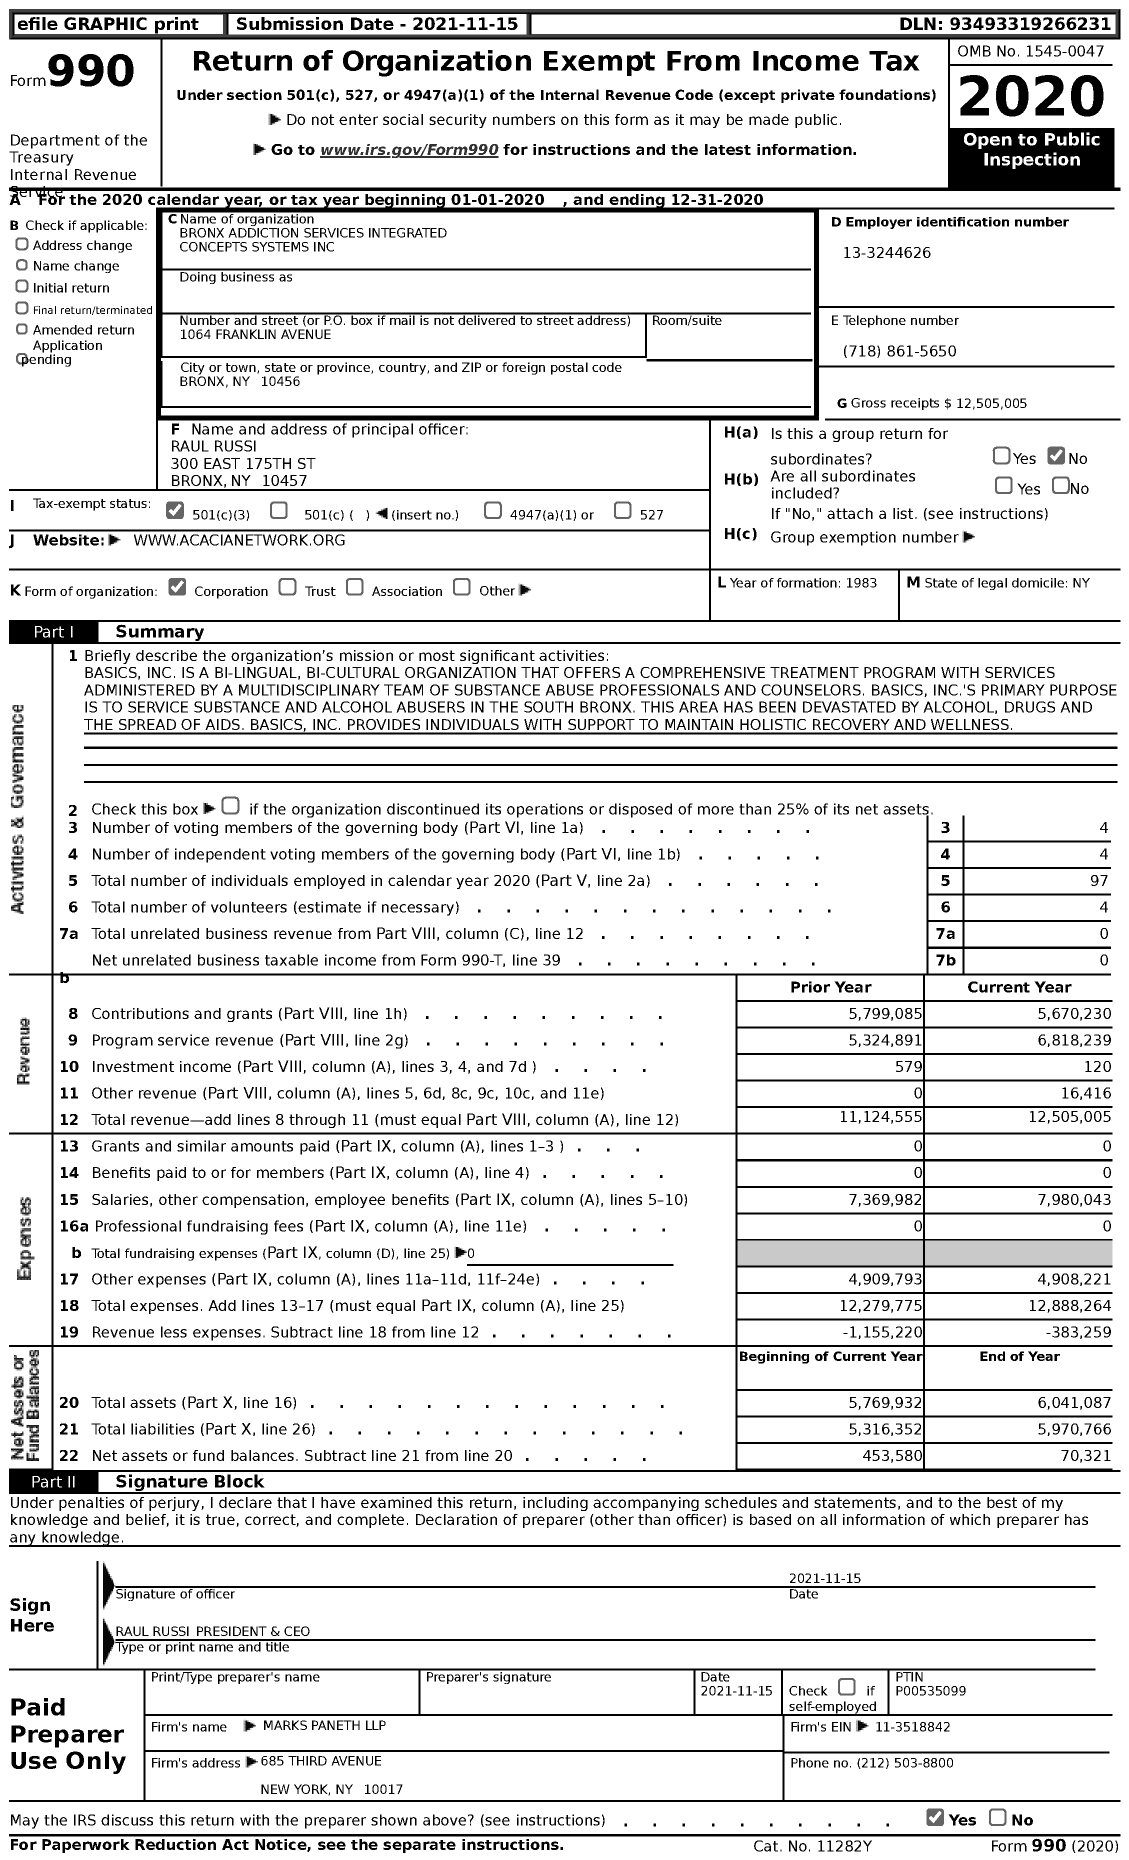 Image of first page of 2020 Form 990 for Bronx Addiction Services Integrated Concepts Systems (BASICS)